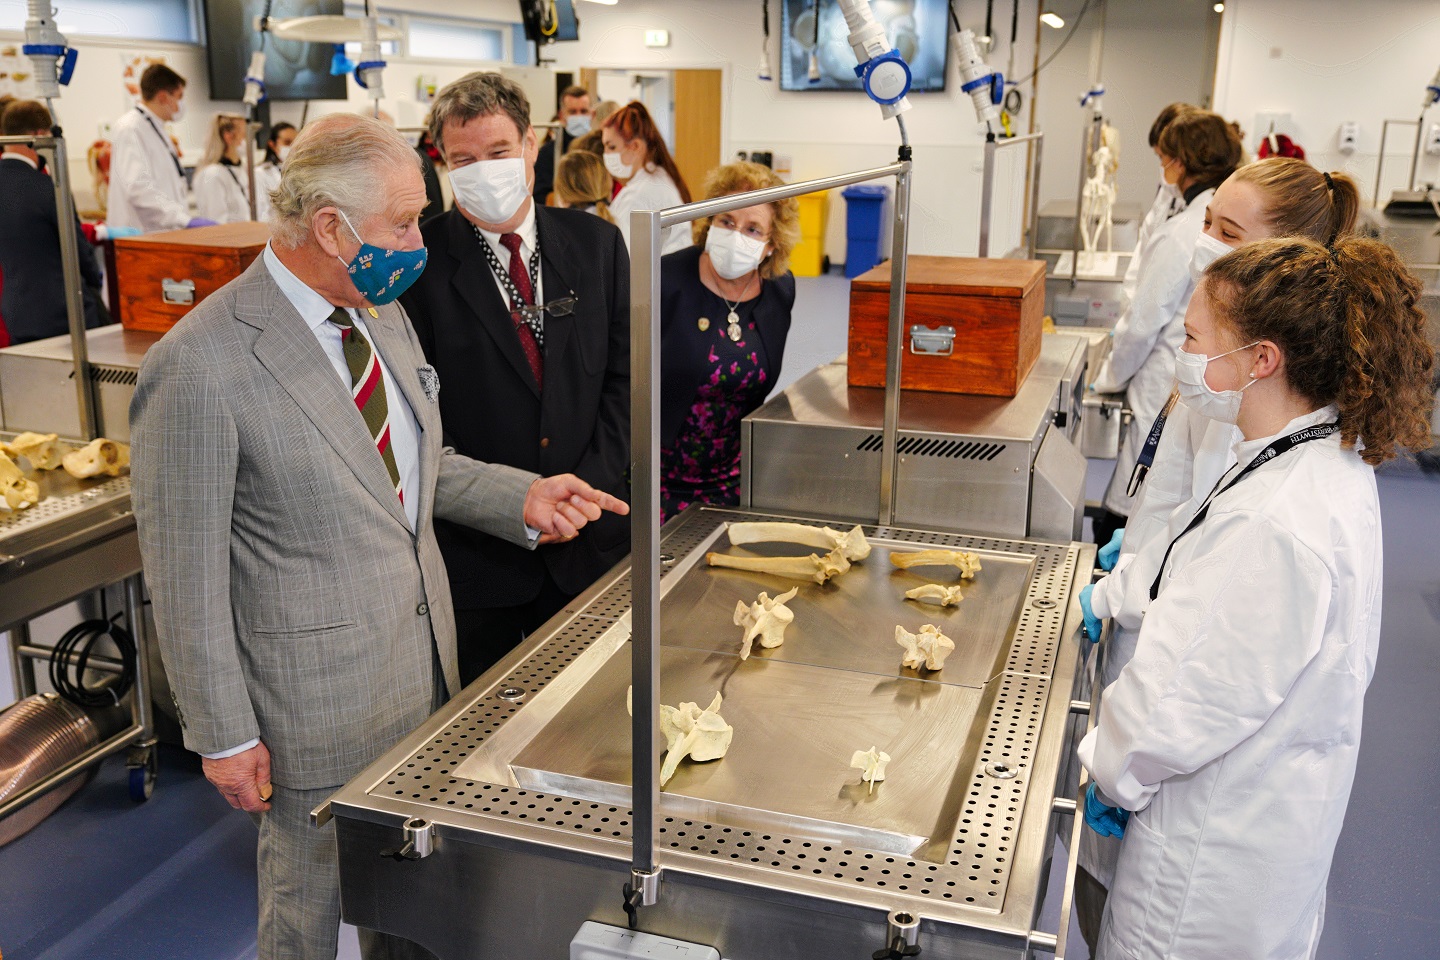 The Prince of Wales meets students at the new School of Veterinary Science with Professor Darrell Abernethy and Professor Elizabeth Treasure, Vice-Chancellor of Aberystwyth University.